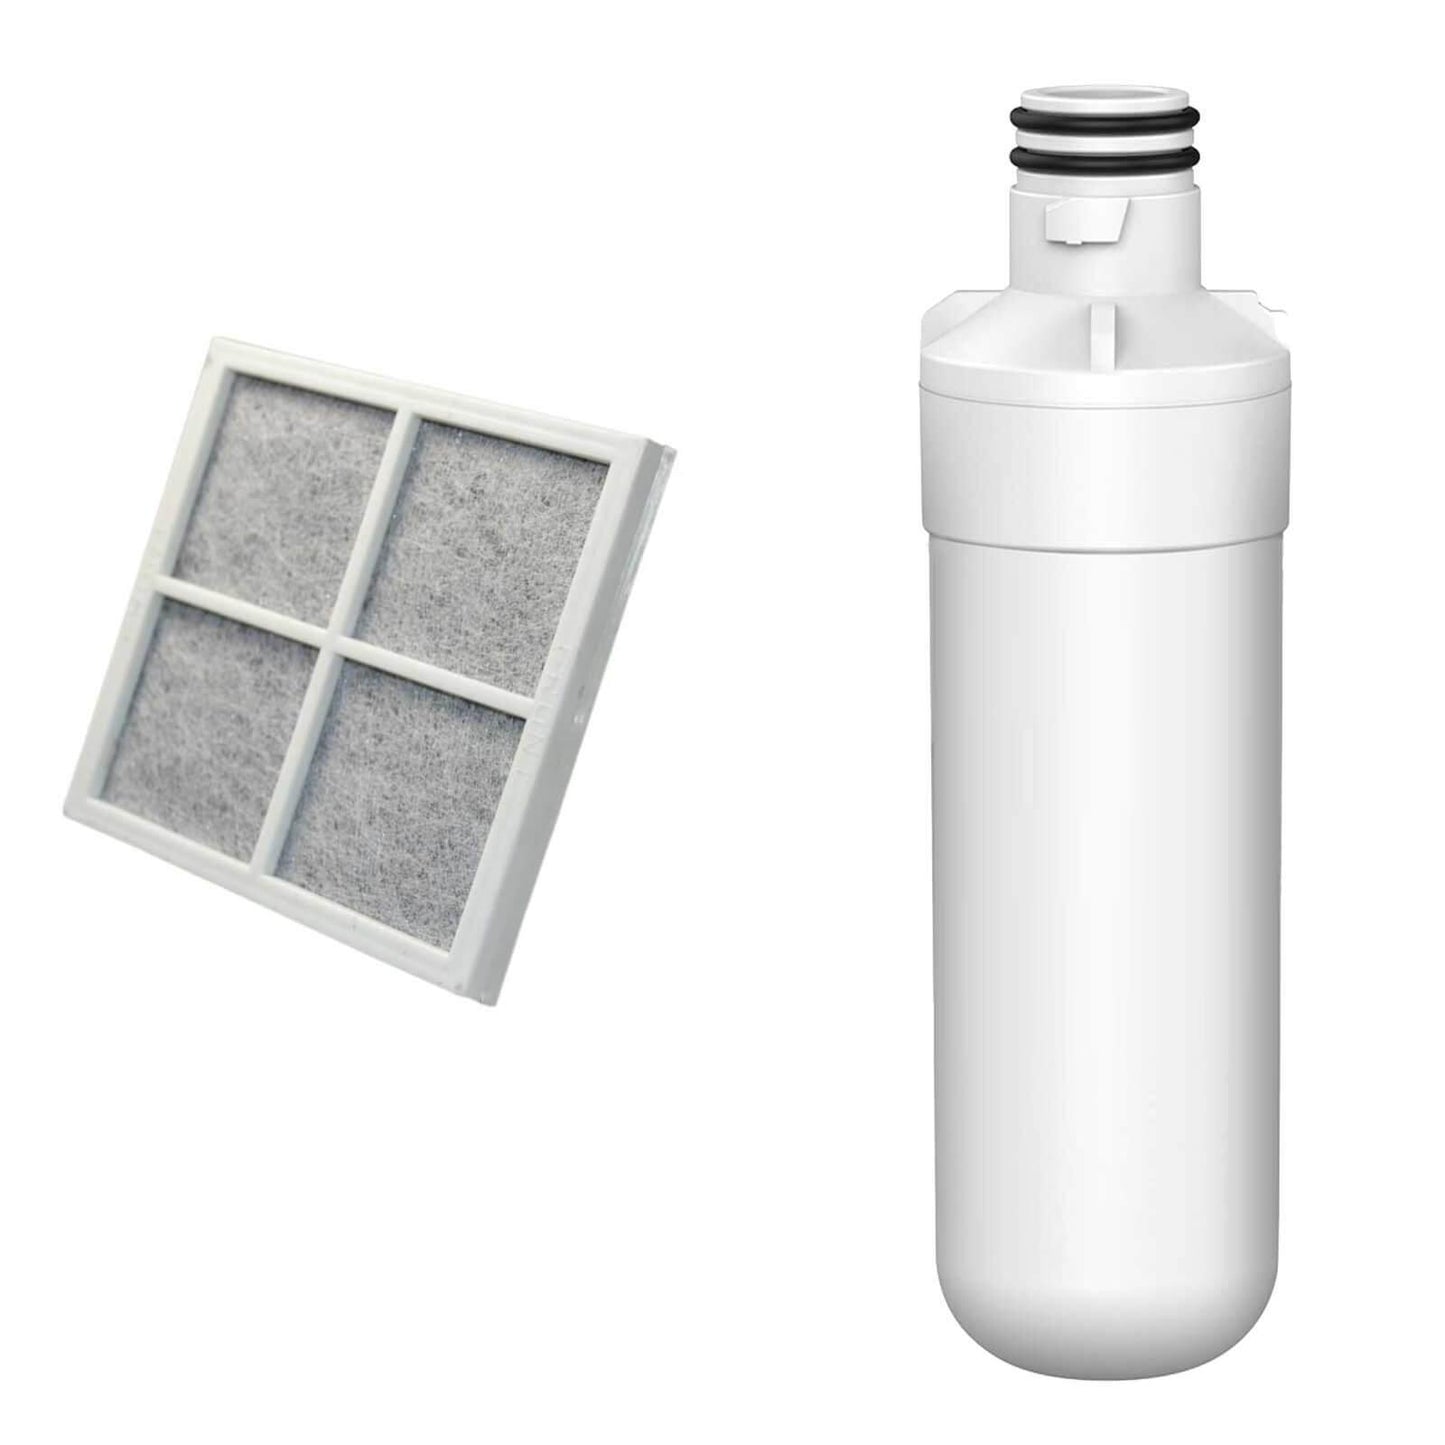 Refrigerator Water Filter with Air Filter for LG MDJ64844601 ADQ74793501 AU Sparesbarn